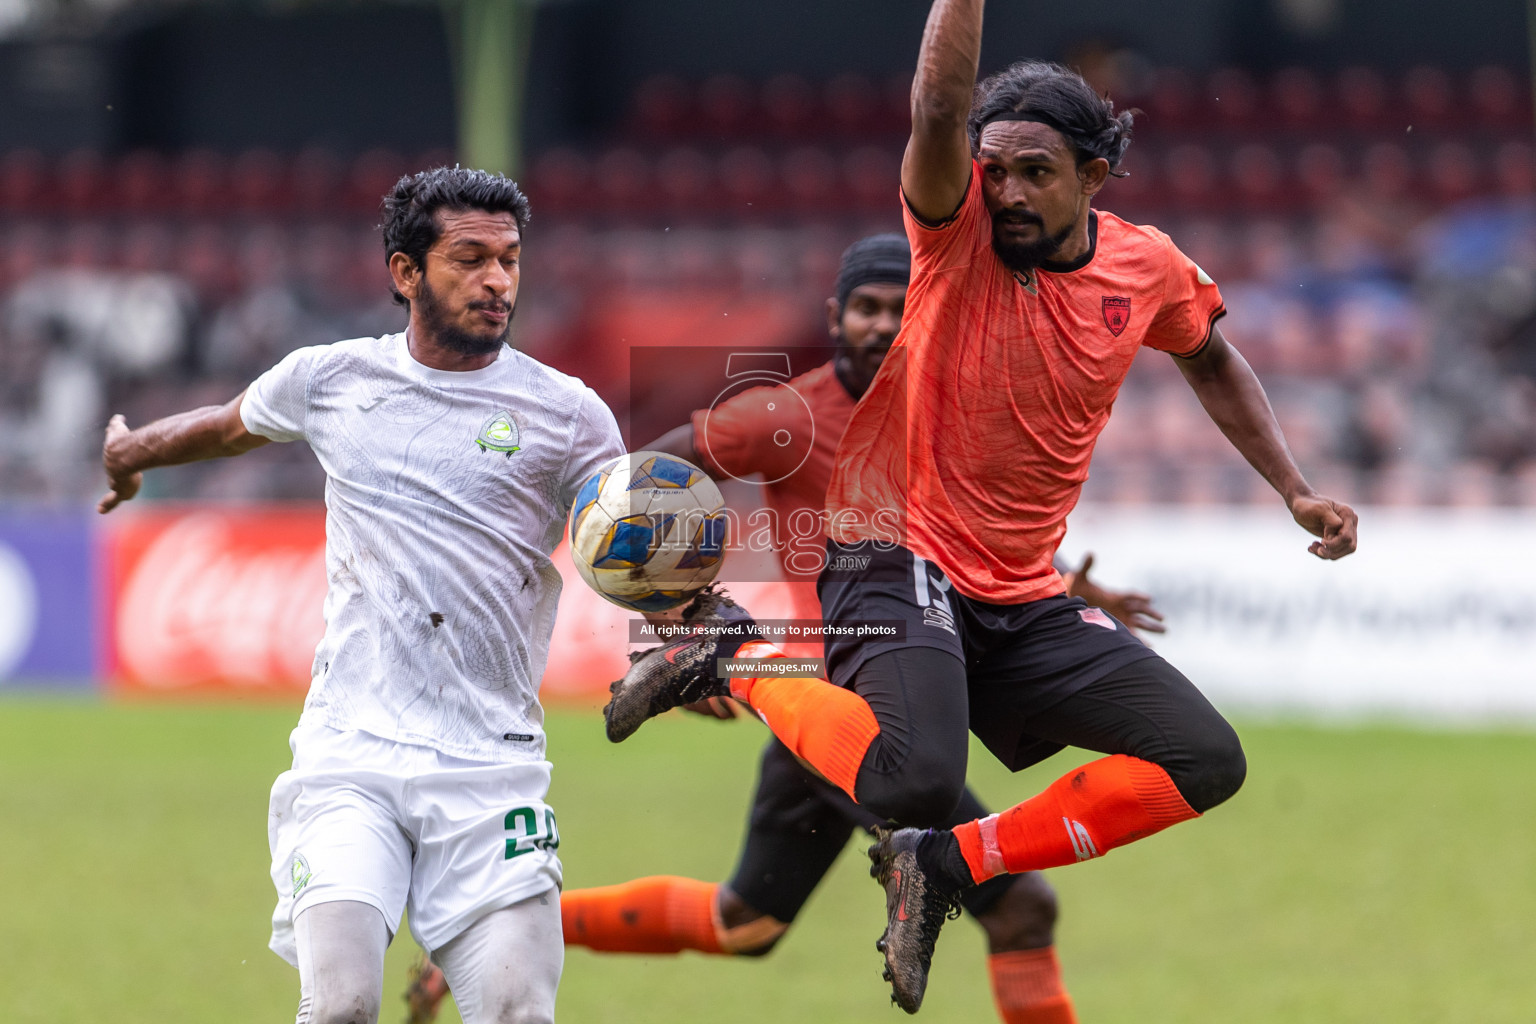 Club Green Streets vs Club Eagles in Ooredoo Dhivehi Premier League 2021/22 on 21st July 2022, held in National Football Stadium, Male', Maldives Photos: Ismail Thoriq/ Images mv